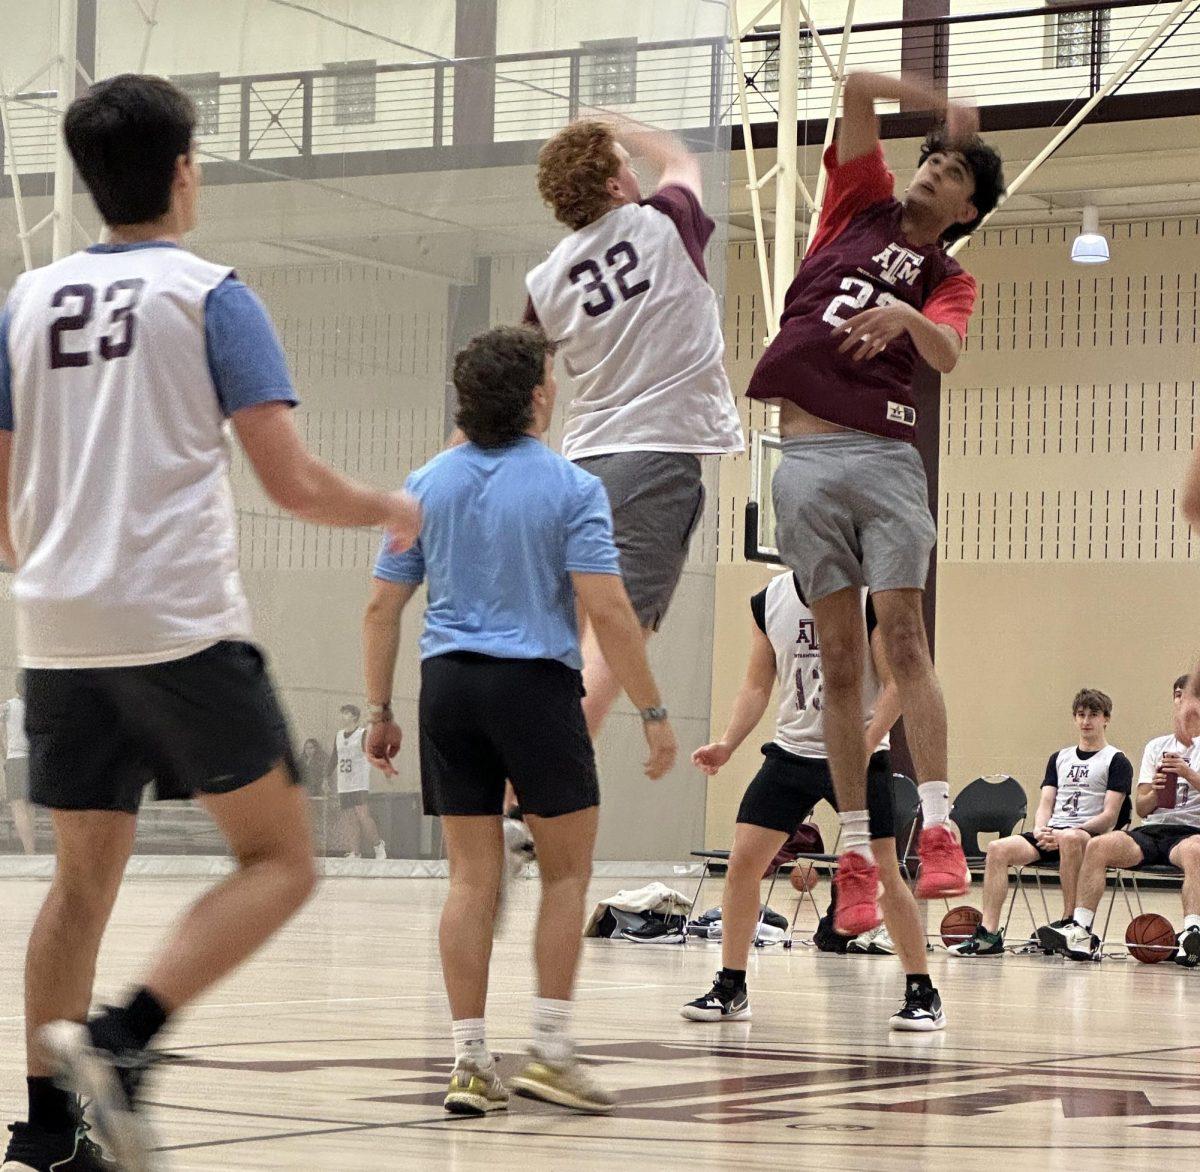 Sophomore Cade Adkison of Loser Bracket Champs at the tipoff for the second game of the recreational basketball season at the Rec Center on Feb. 14. (Photo by Damian Buitron-Adams, JOUR 359 Contributor)